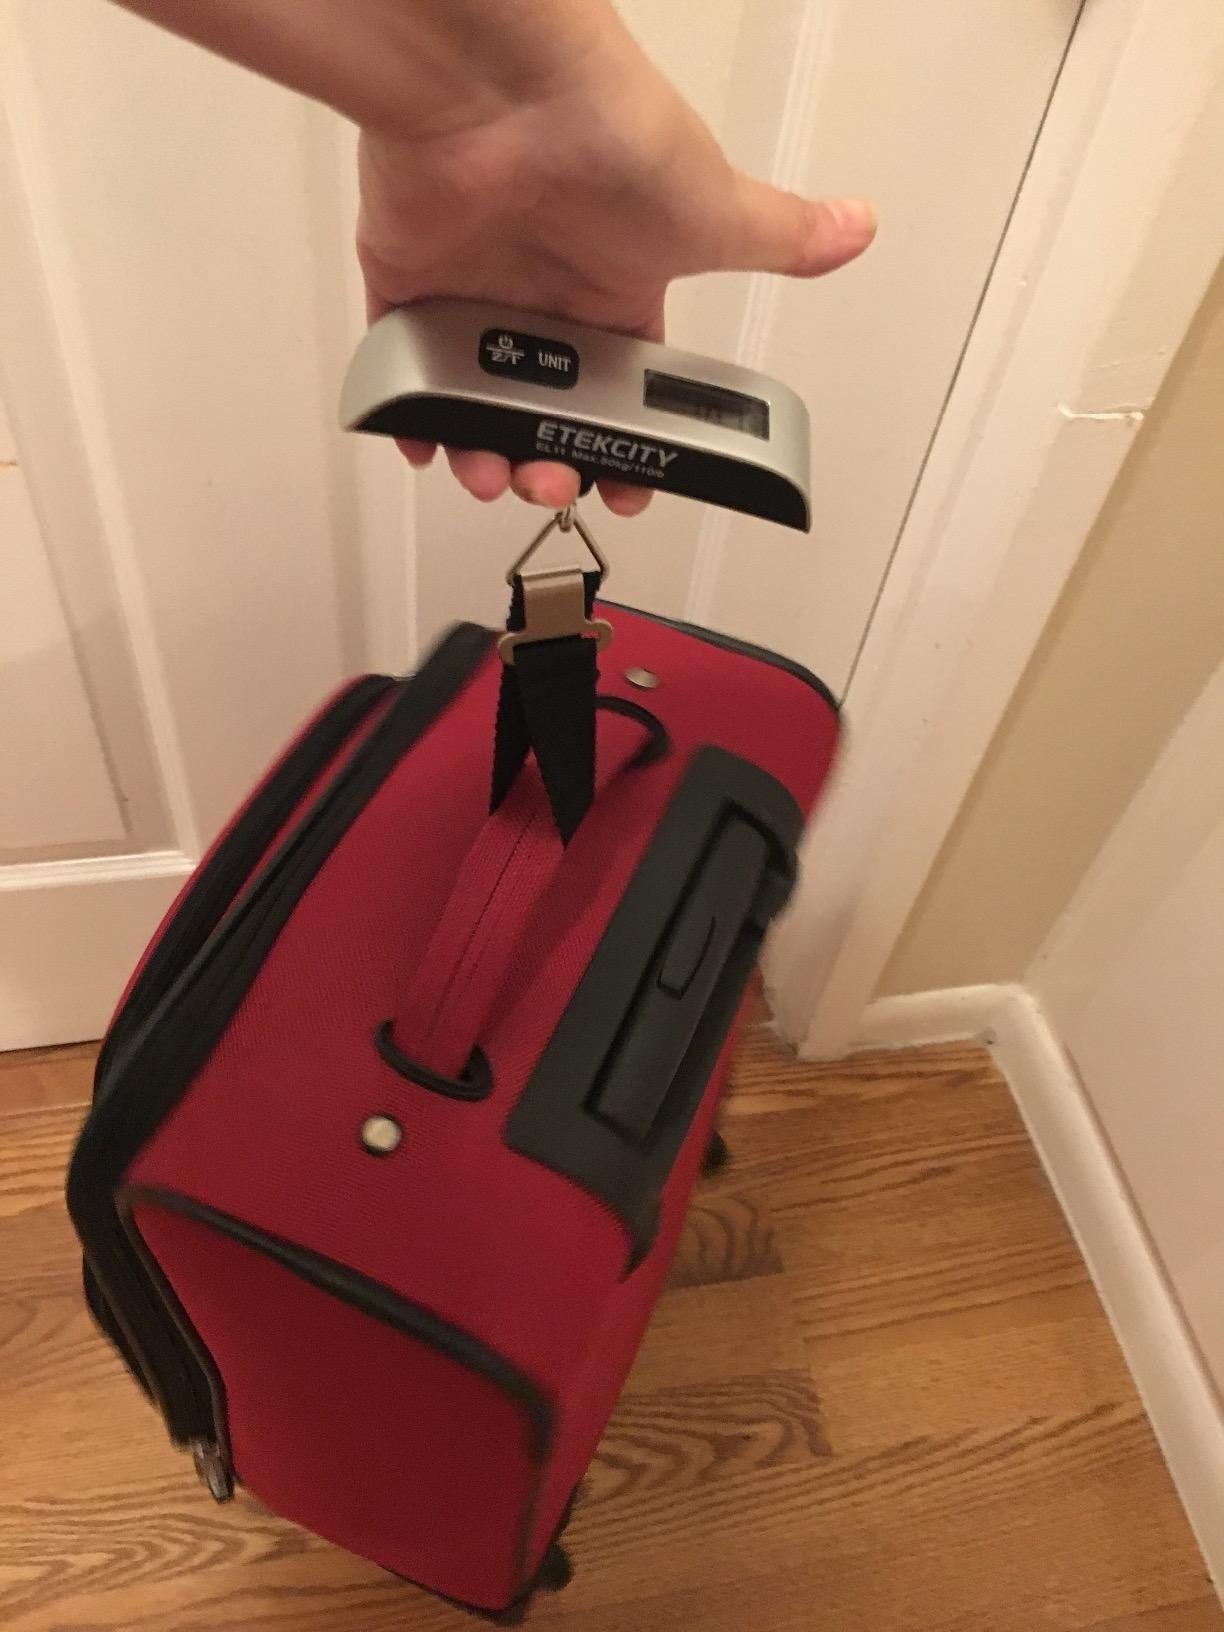 the reviewer using the scale to weigh a red suitcase